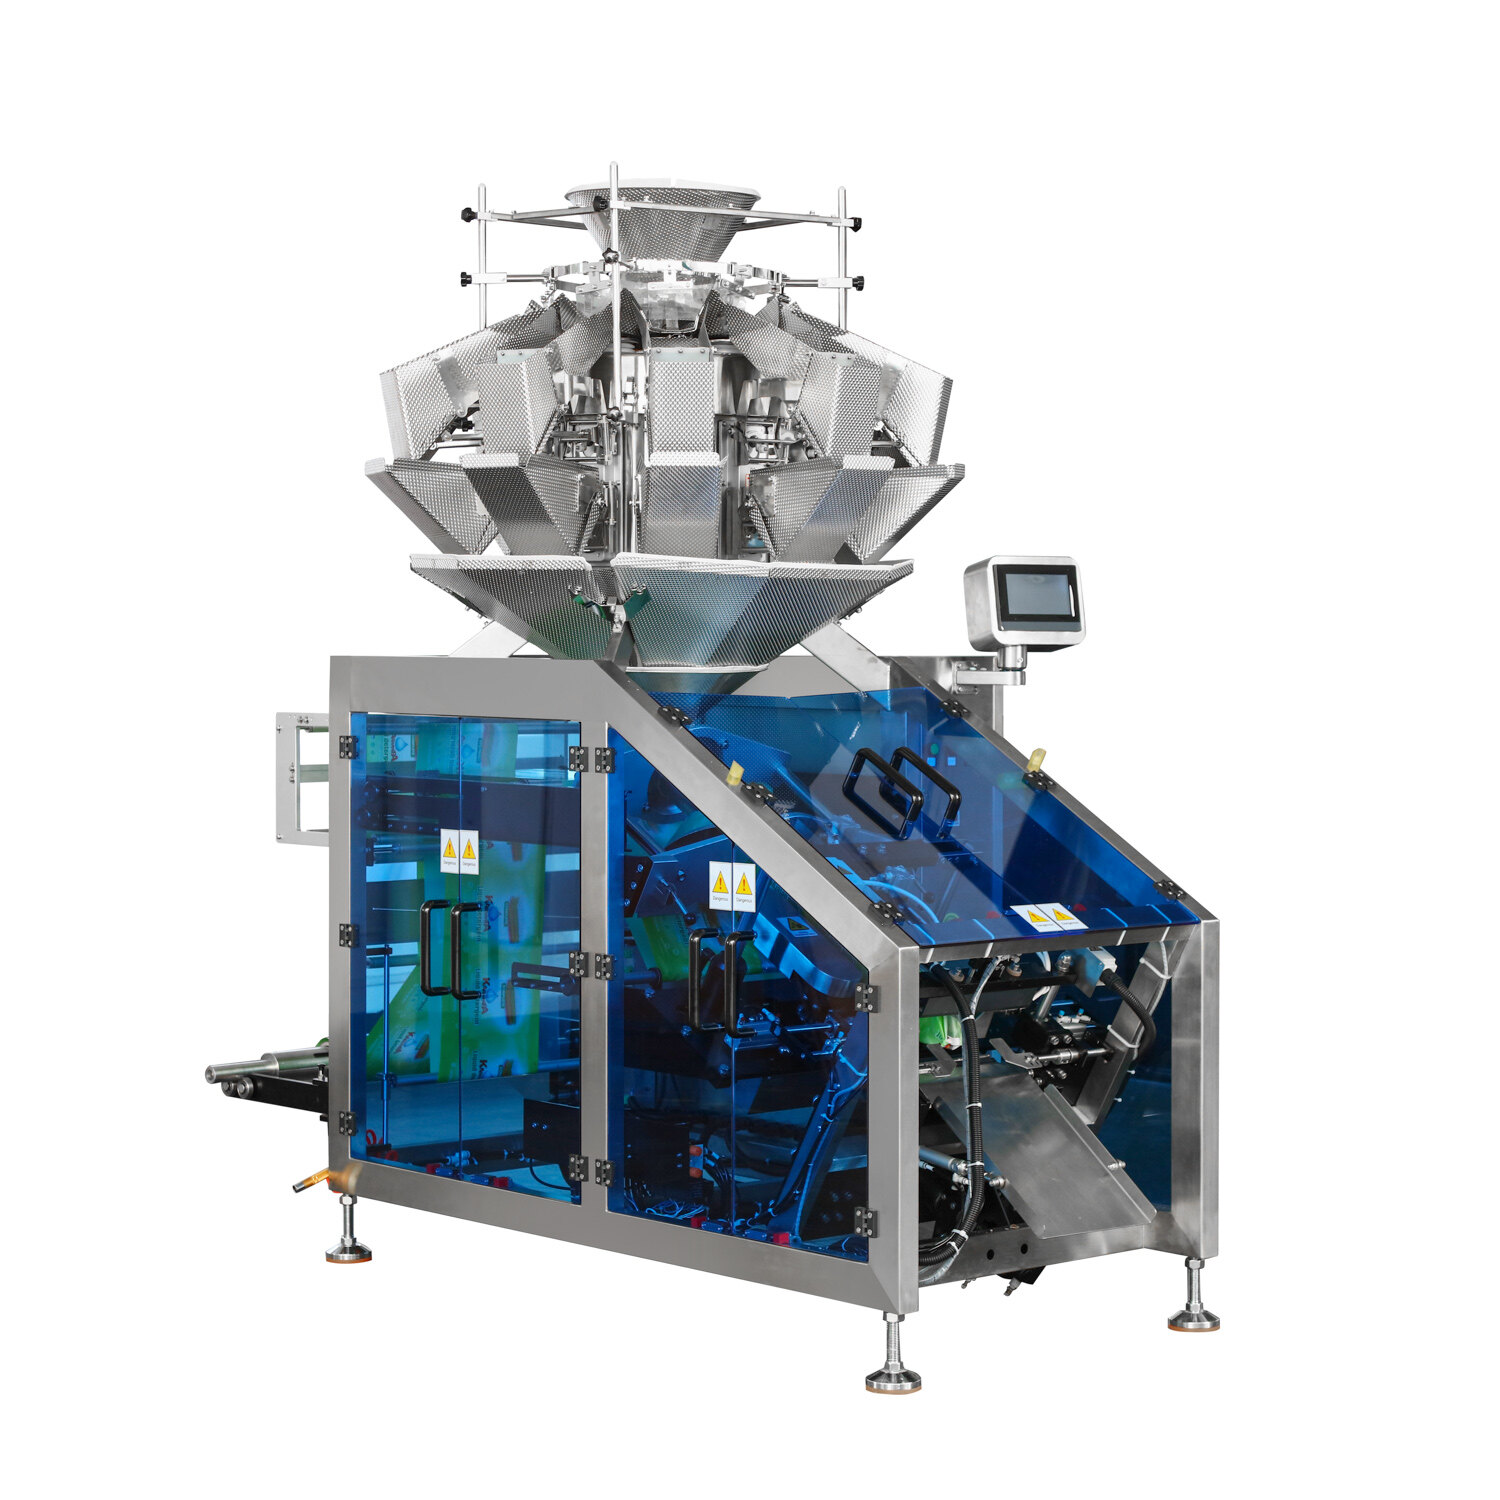 multihead weigher packing machine factory, multihead weigher packing machine manufacturers, multi head weigher packing machine